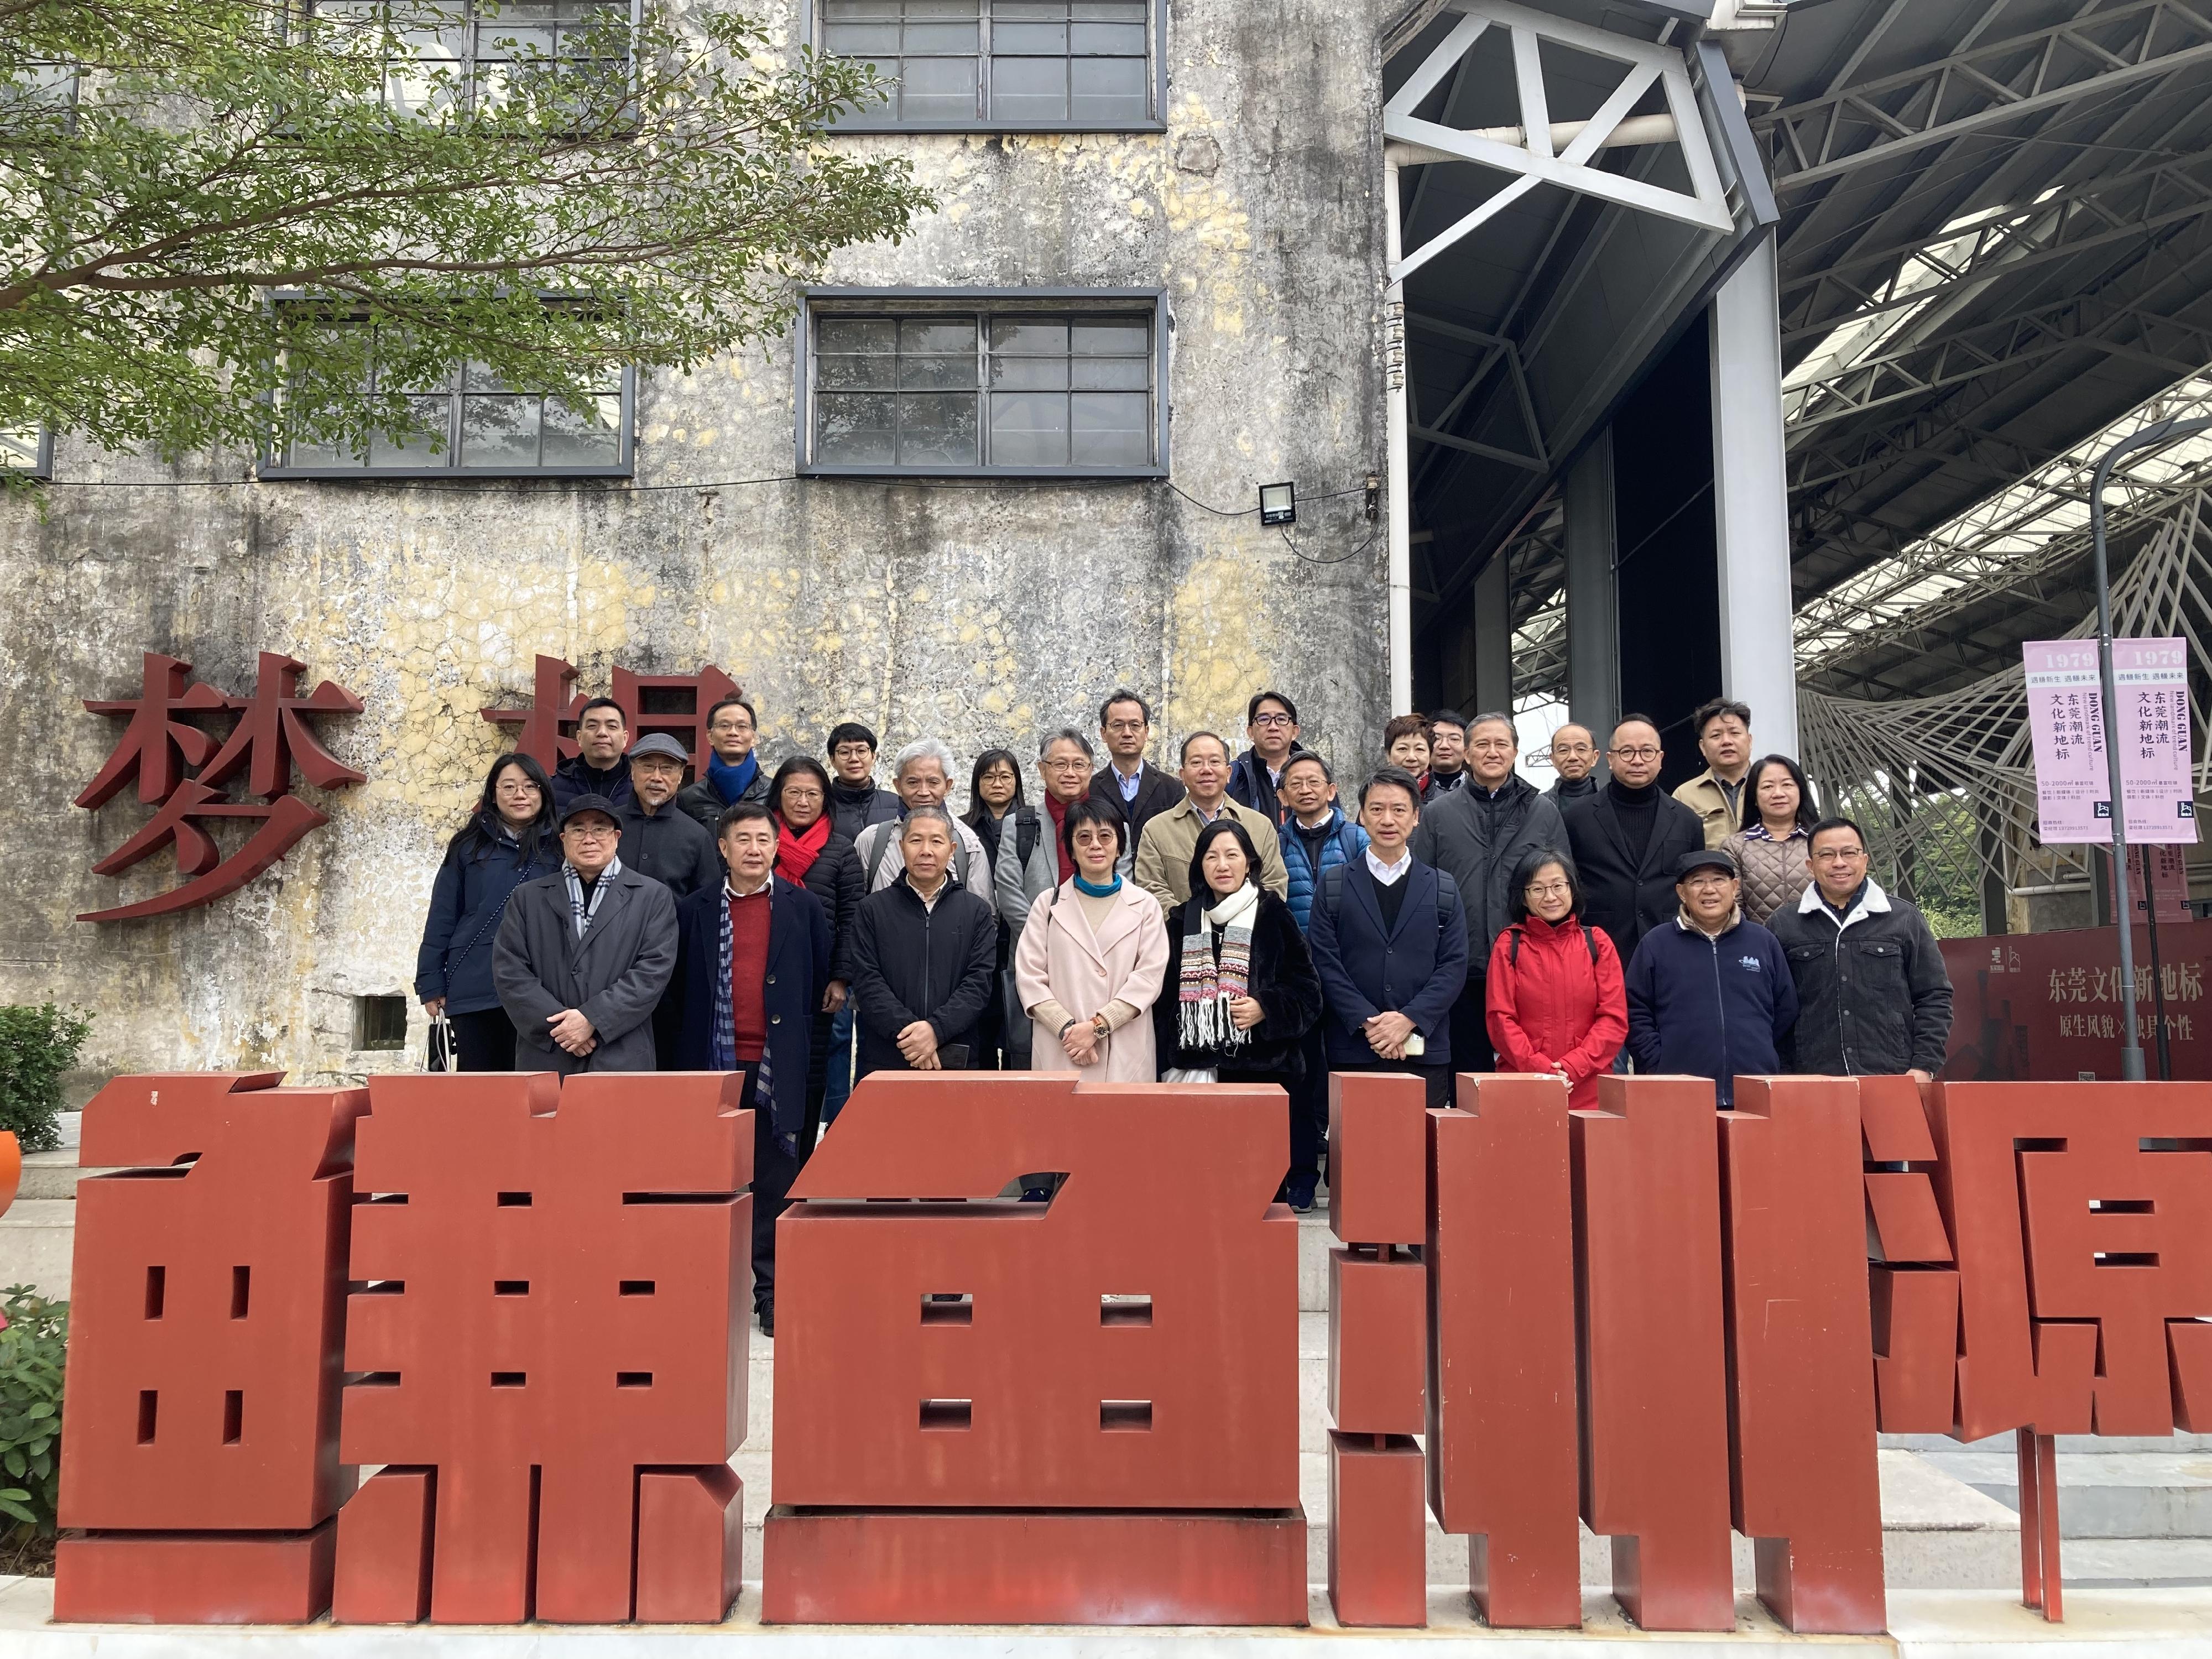 The Town Planning Board visited Guangzhou, Dongguan and Shenzhen from December 16 to 18 to better understand the prevailing urban planning and development in the Greater Bay Area. Photo shows the Chairman of the Town Planning Board, Ms Doris Ho (front row, fourth left); and the Director of Planning, Mr Ivan Chung (front row, fourth right) together with the delegation after visiting Jianyuzhou Cultural and Creative Park.
